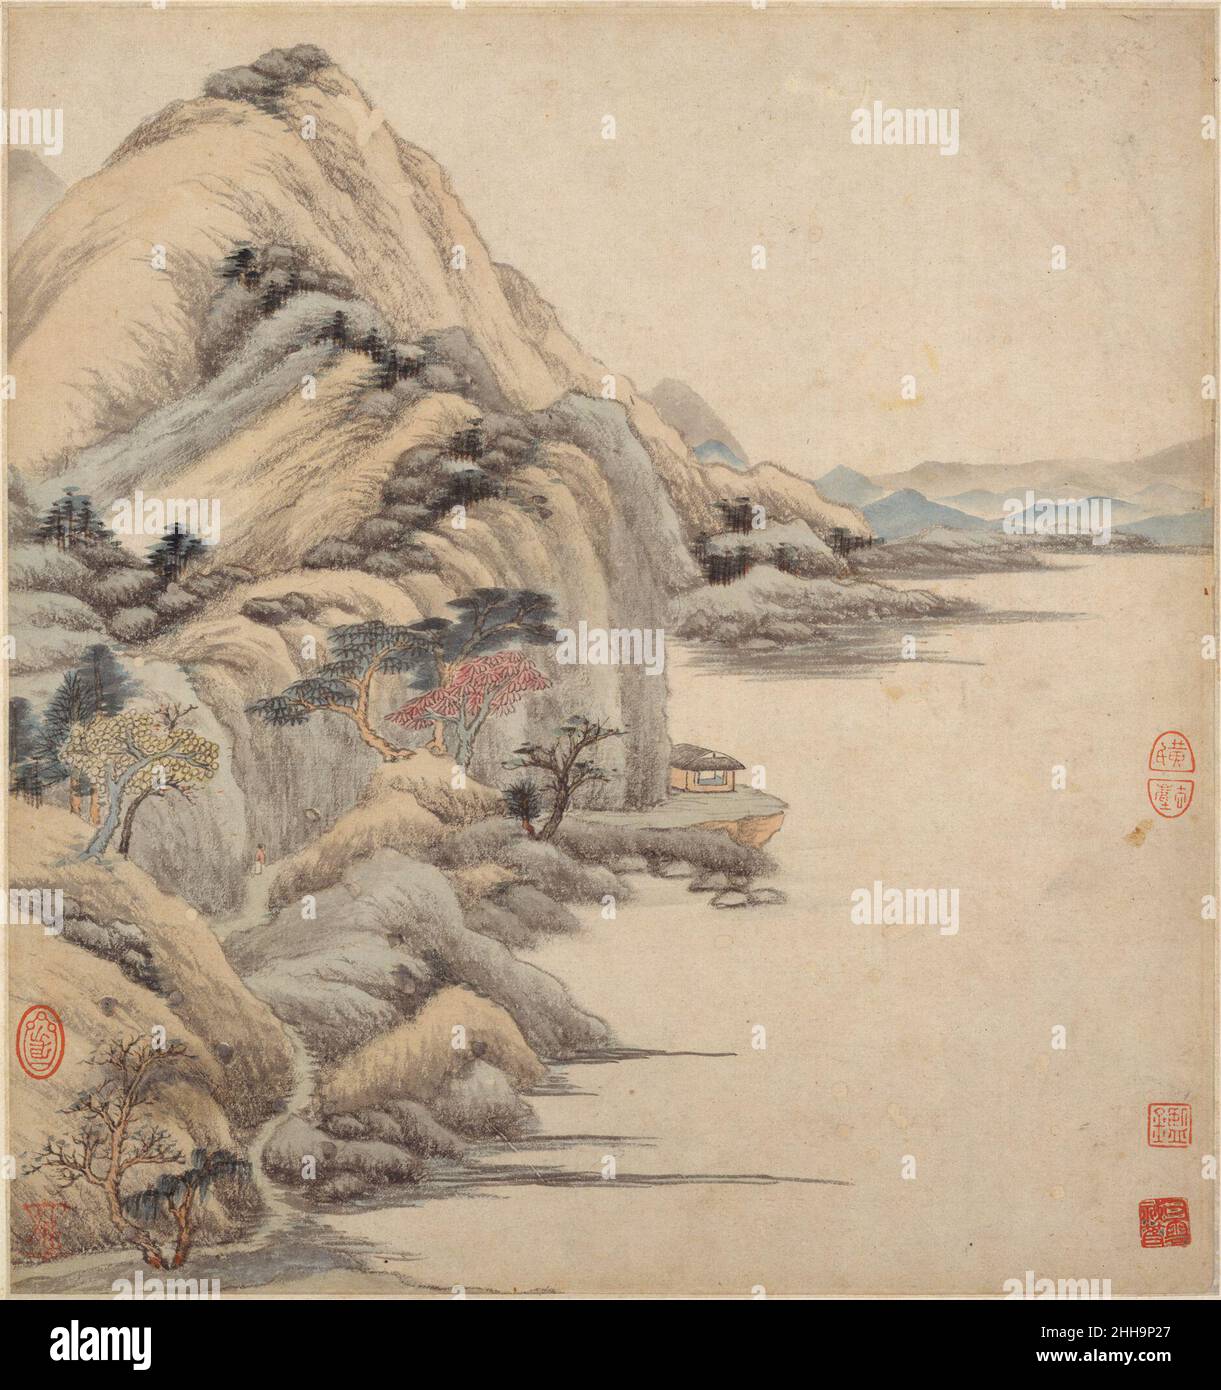 Landscapes in the styles of ancient masters 17th century Wang Jian Chinese Wang Jian's paintings exemplify the vision of a man steeped in tradition. A member of the educated elite, Wang enjoyed access to the region's numerous private collections as well as inheriting a rich assemblage of old masters from his grandfather Wang Shizhen (1526–1590). This firsthand knowledge of past masterpieces inspired Wang to follow the example of Dong Qichang (1555–1636) in seeking a personal artistic synthesis through the diligent study of 'orthodox' models.This album is a virtuoso display of Wang Jian's comma Stock Photo